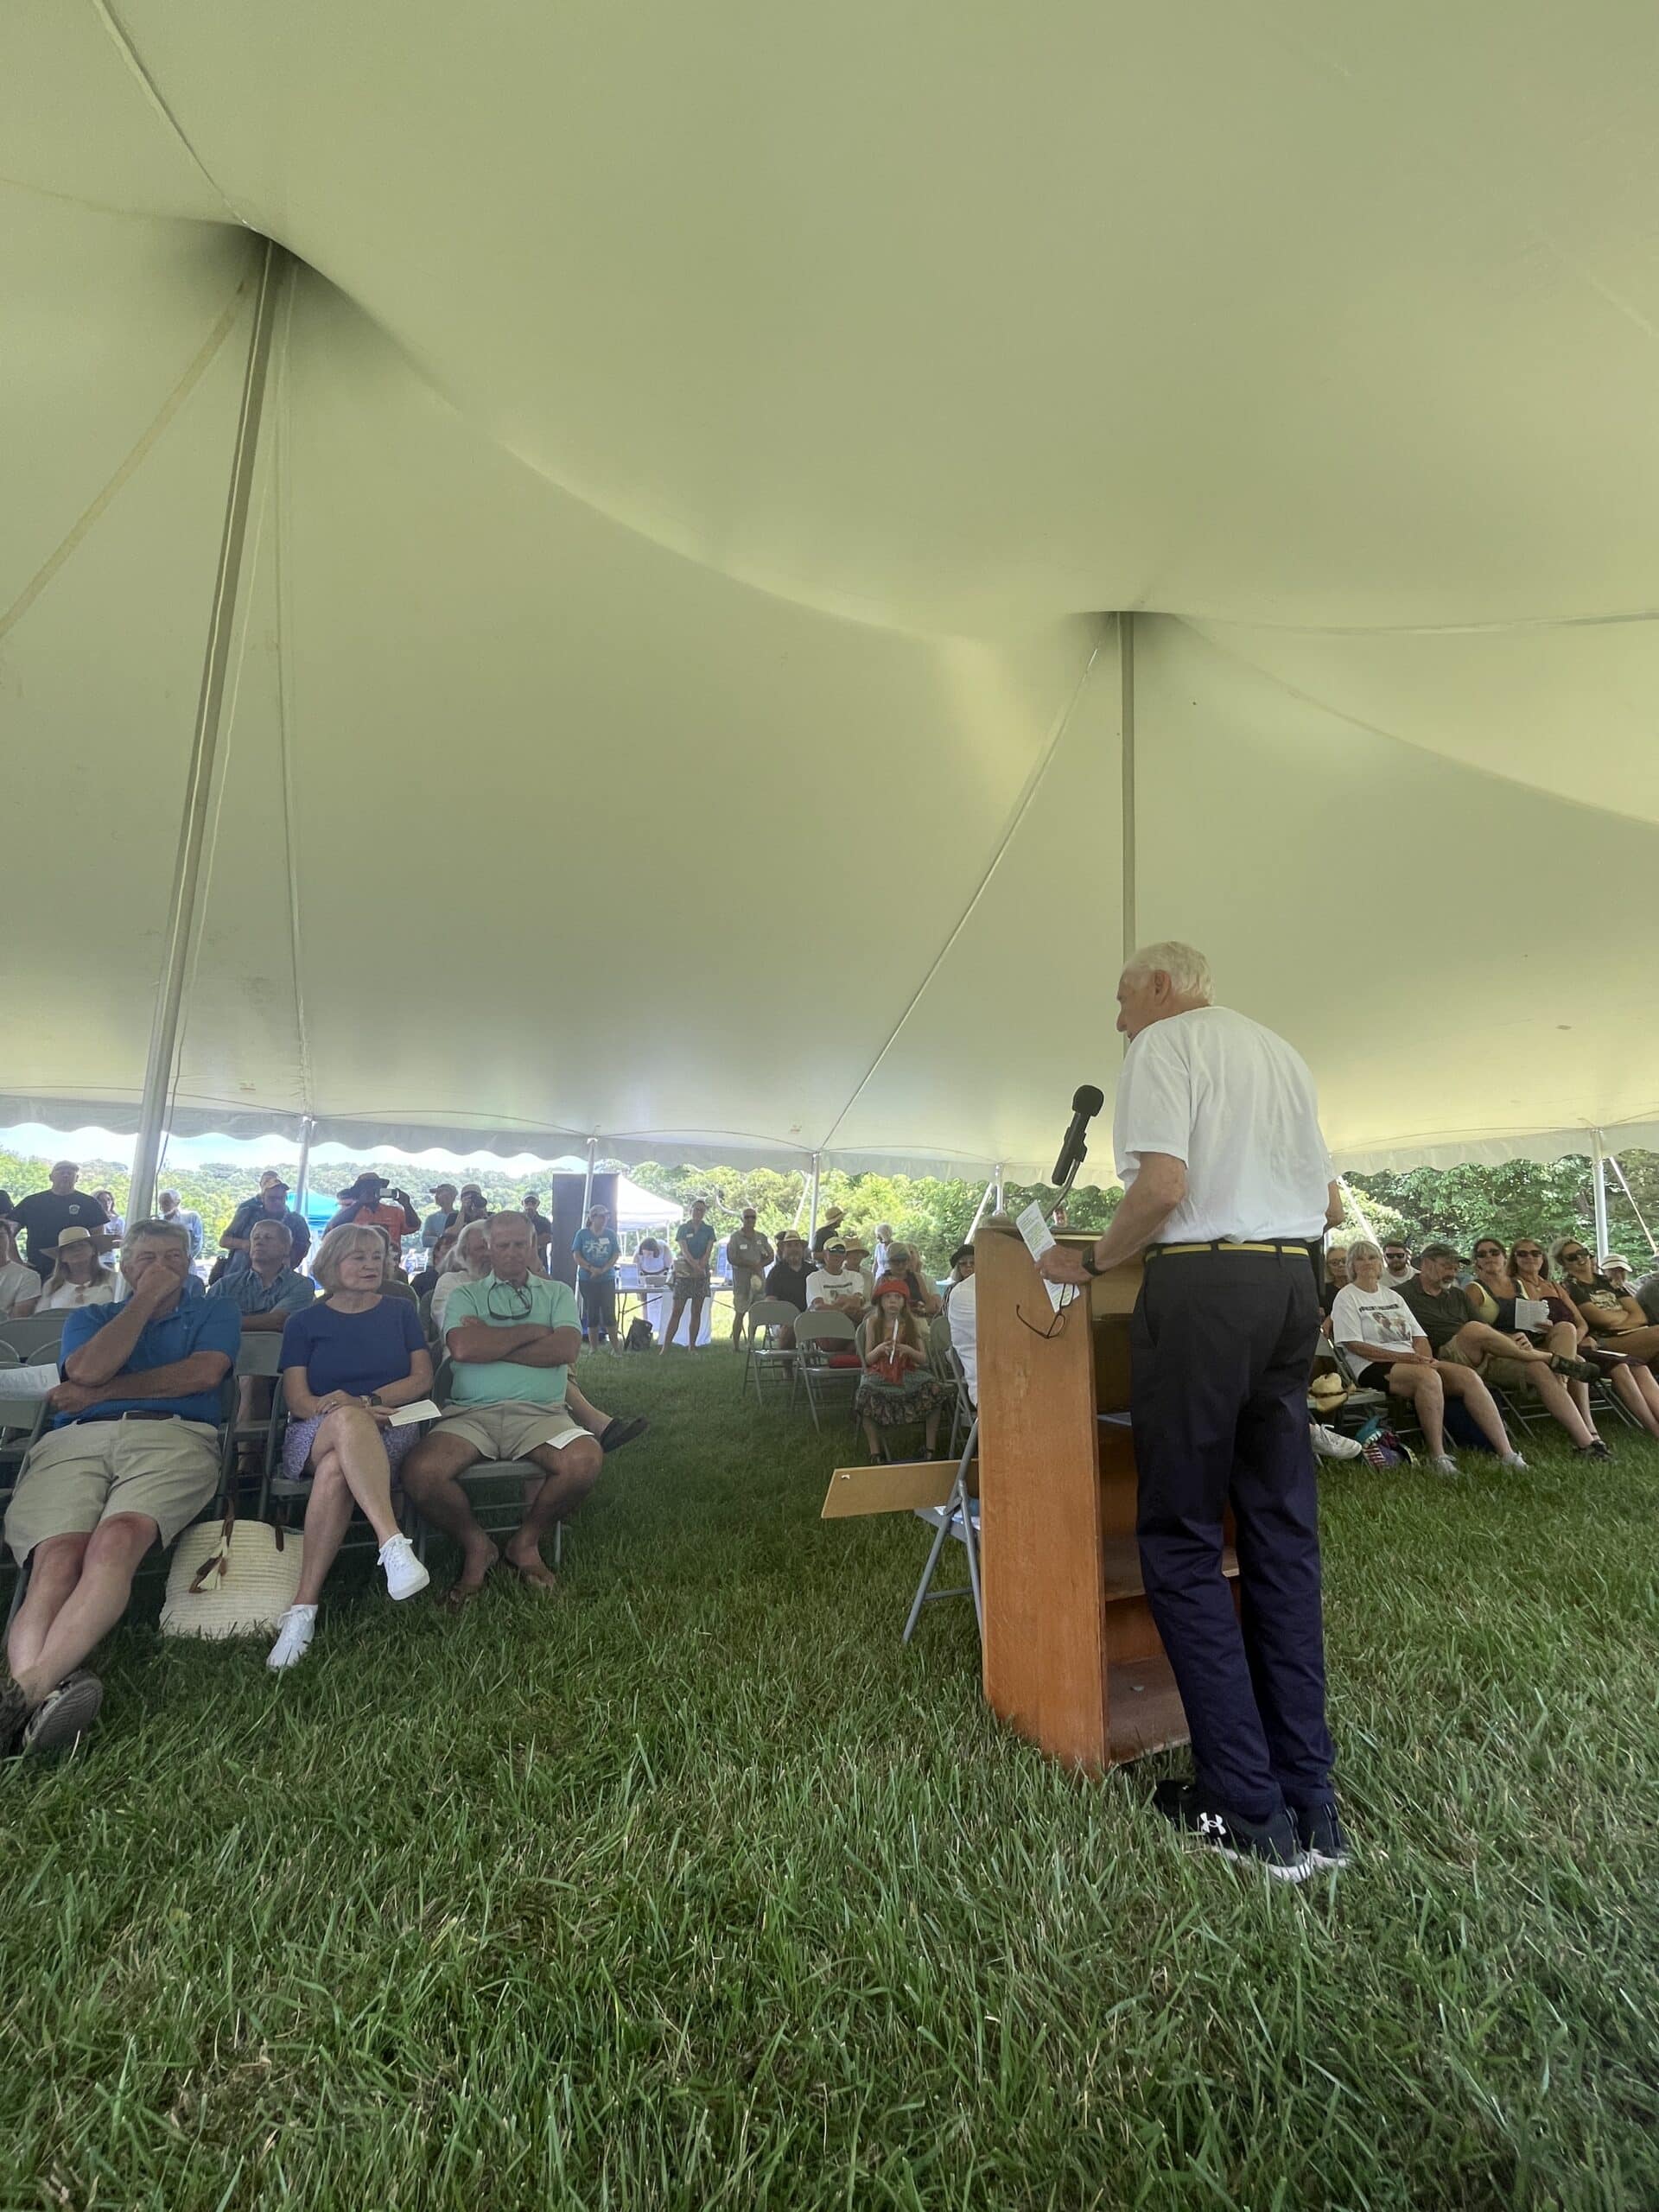 A person speaks at a podium in front of a group of people under a canopy